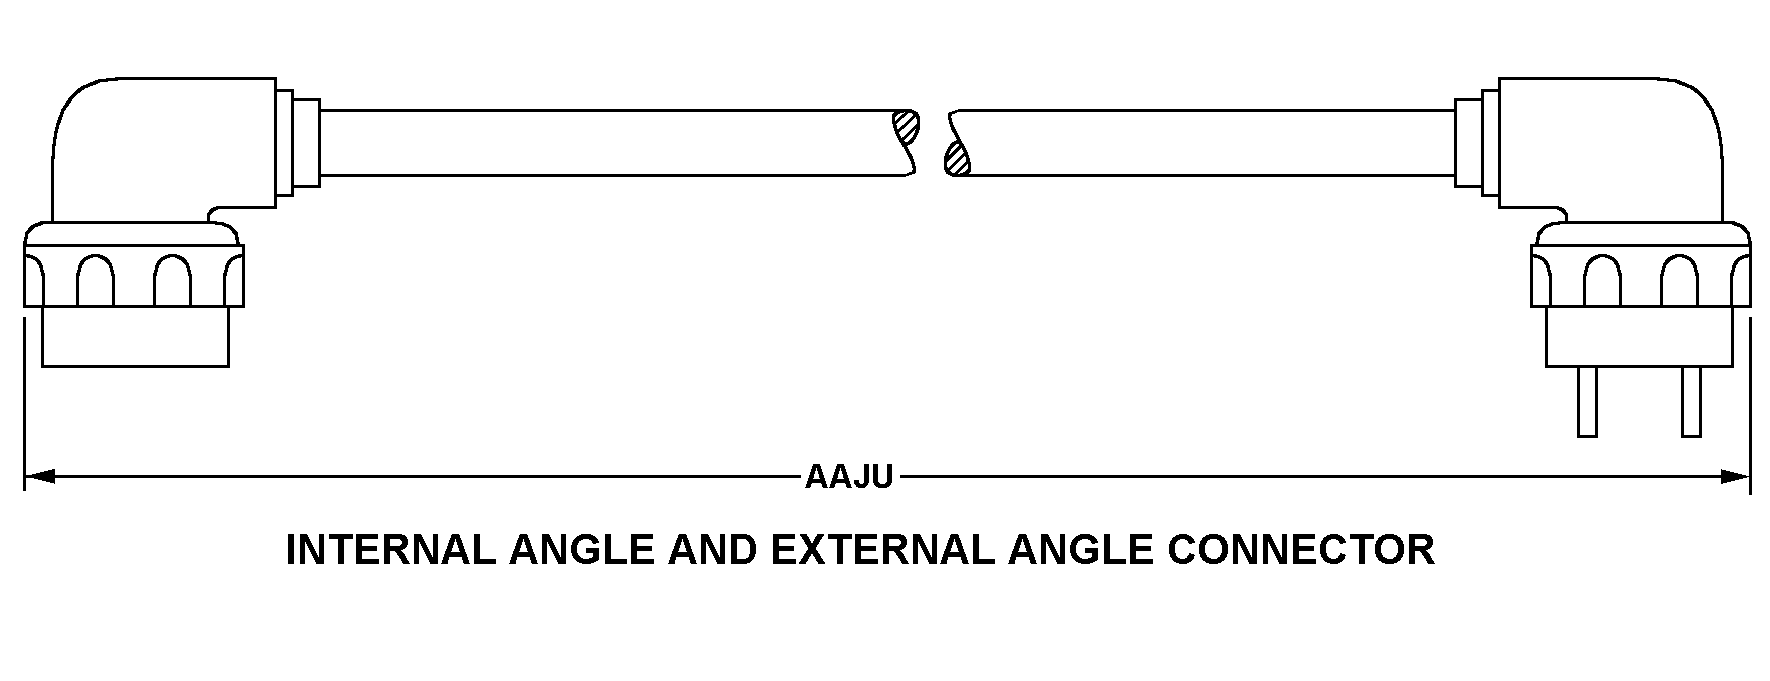 INTERNAL ANGLE AND EXTERNAL ANGLE CONNECTOR style nsn 6150-01-238-9292